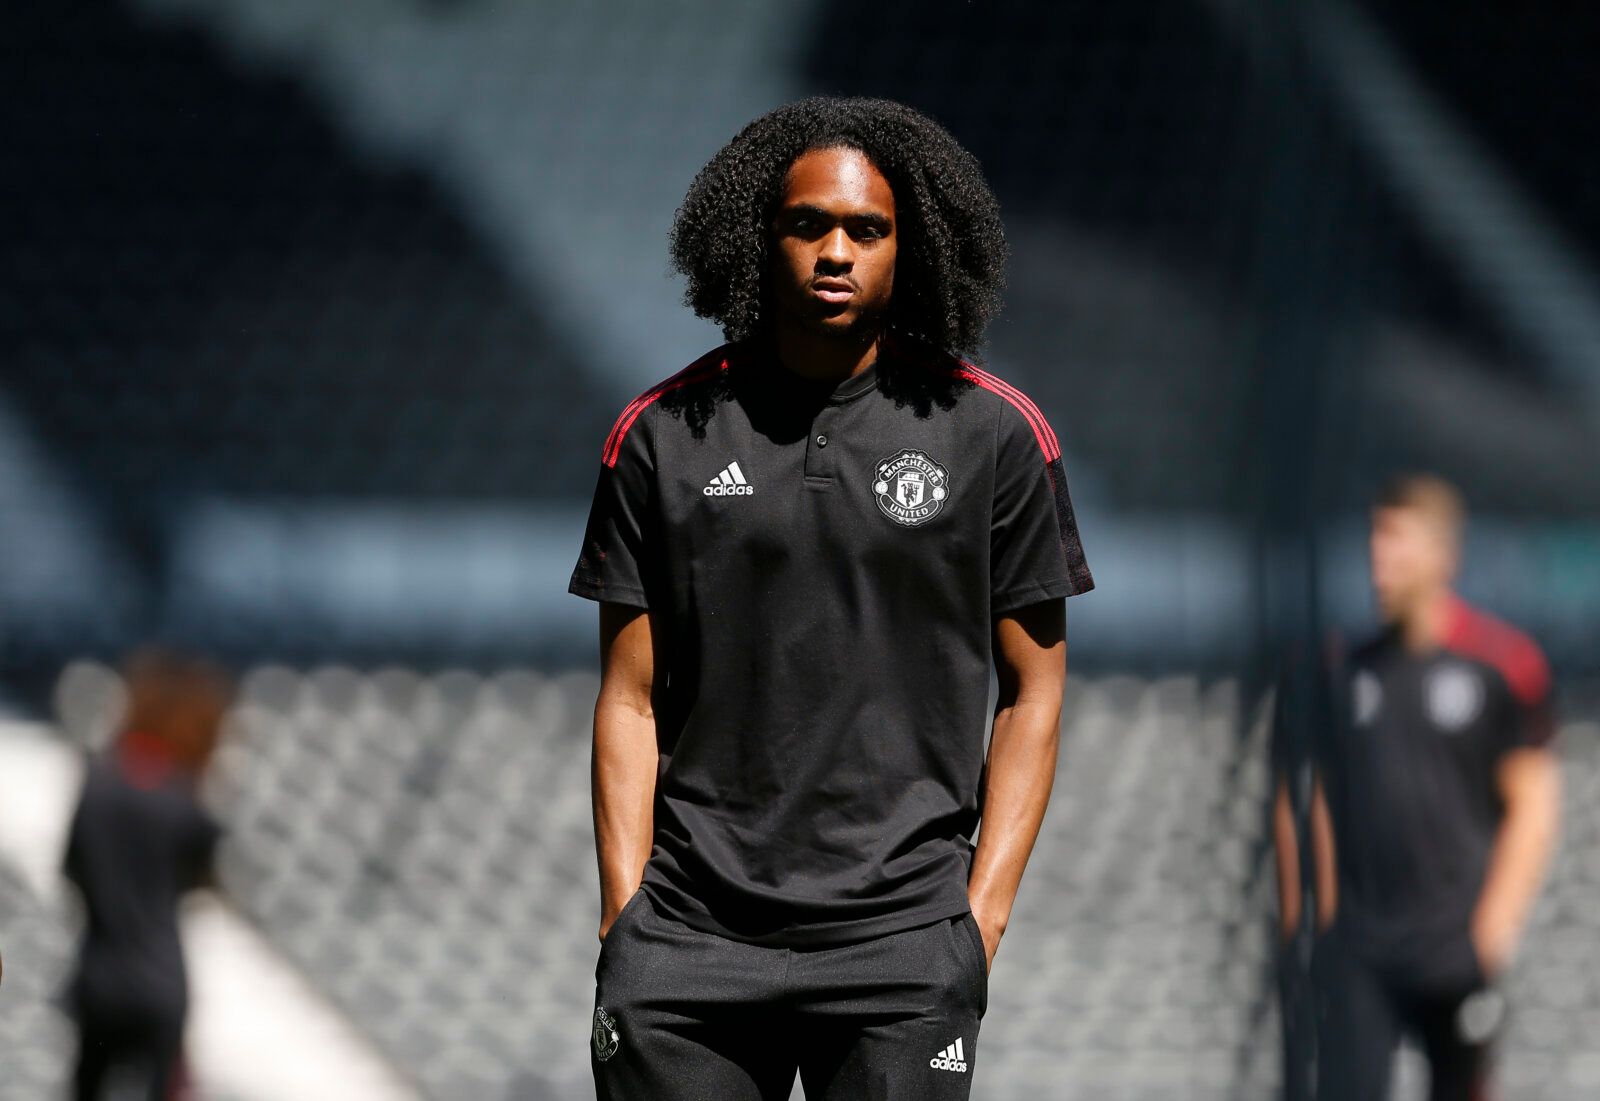 Soccer Football - Pre Season Friendly - Derby County v Manchester United - Pride Park, Derby, Britain - July 18, 2021 Manchester United's Tahith Chong before the match Action Images via Reuters/Craig Brough